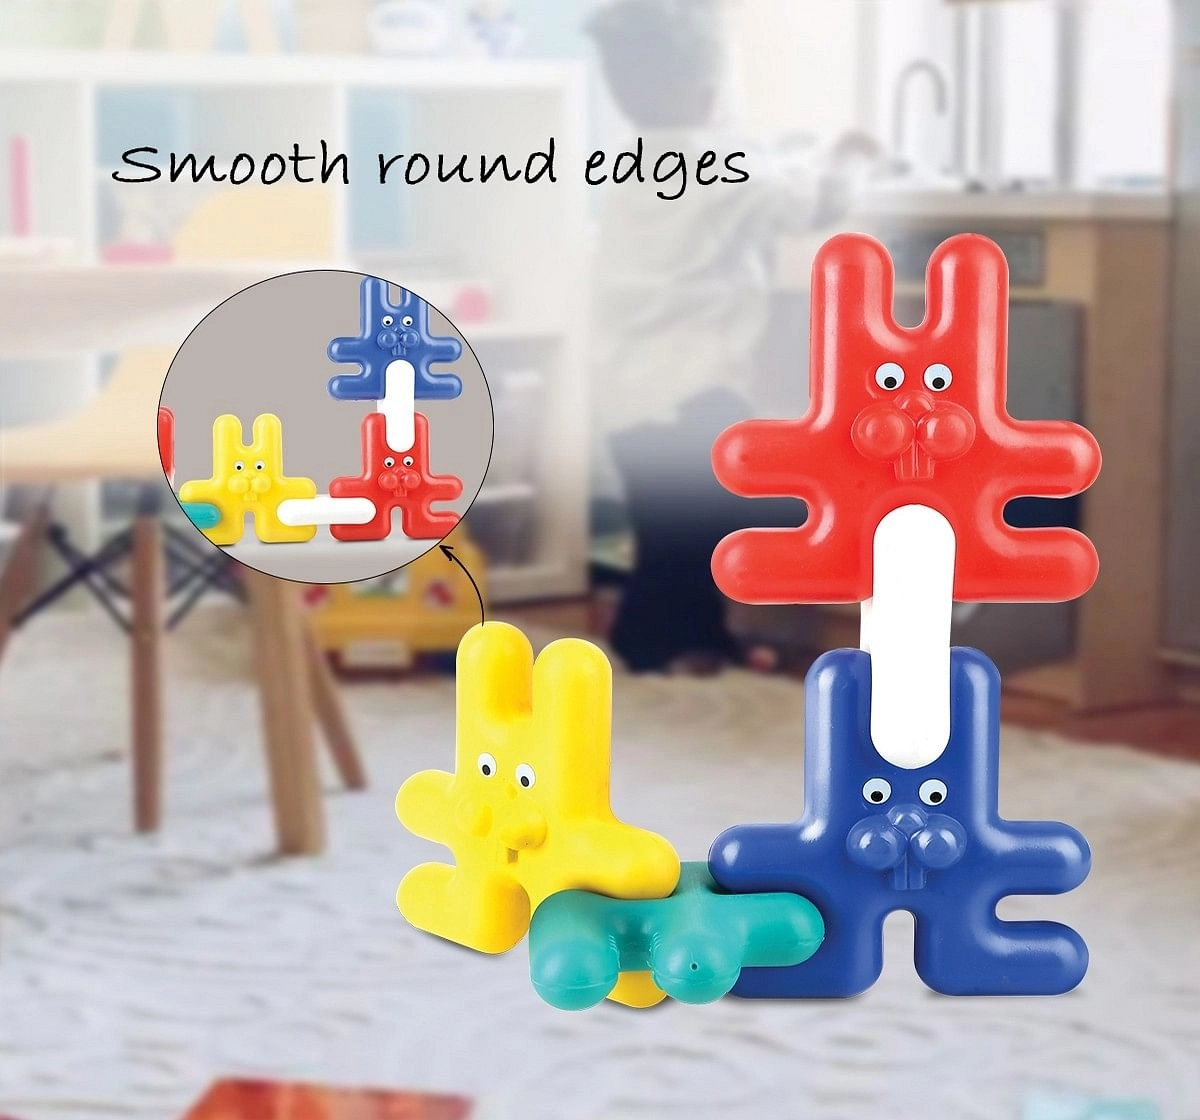 Ok Play Funny Bunny Link Interlocking blocks Early learning educational toy for kids Multicolor 0M+